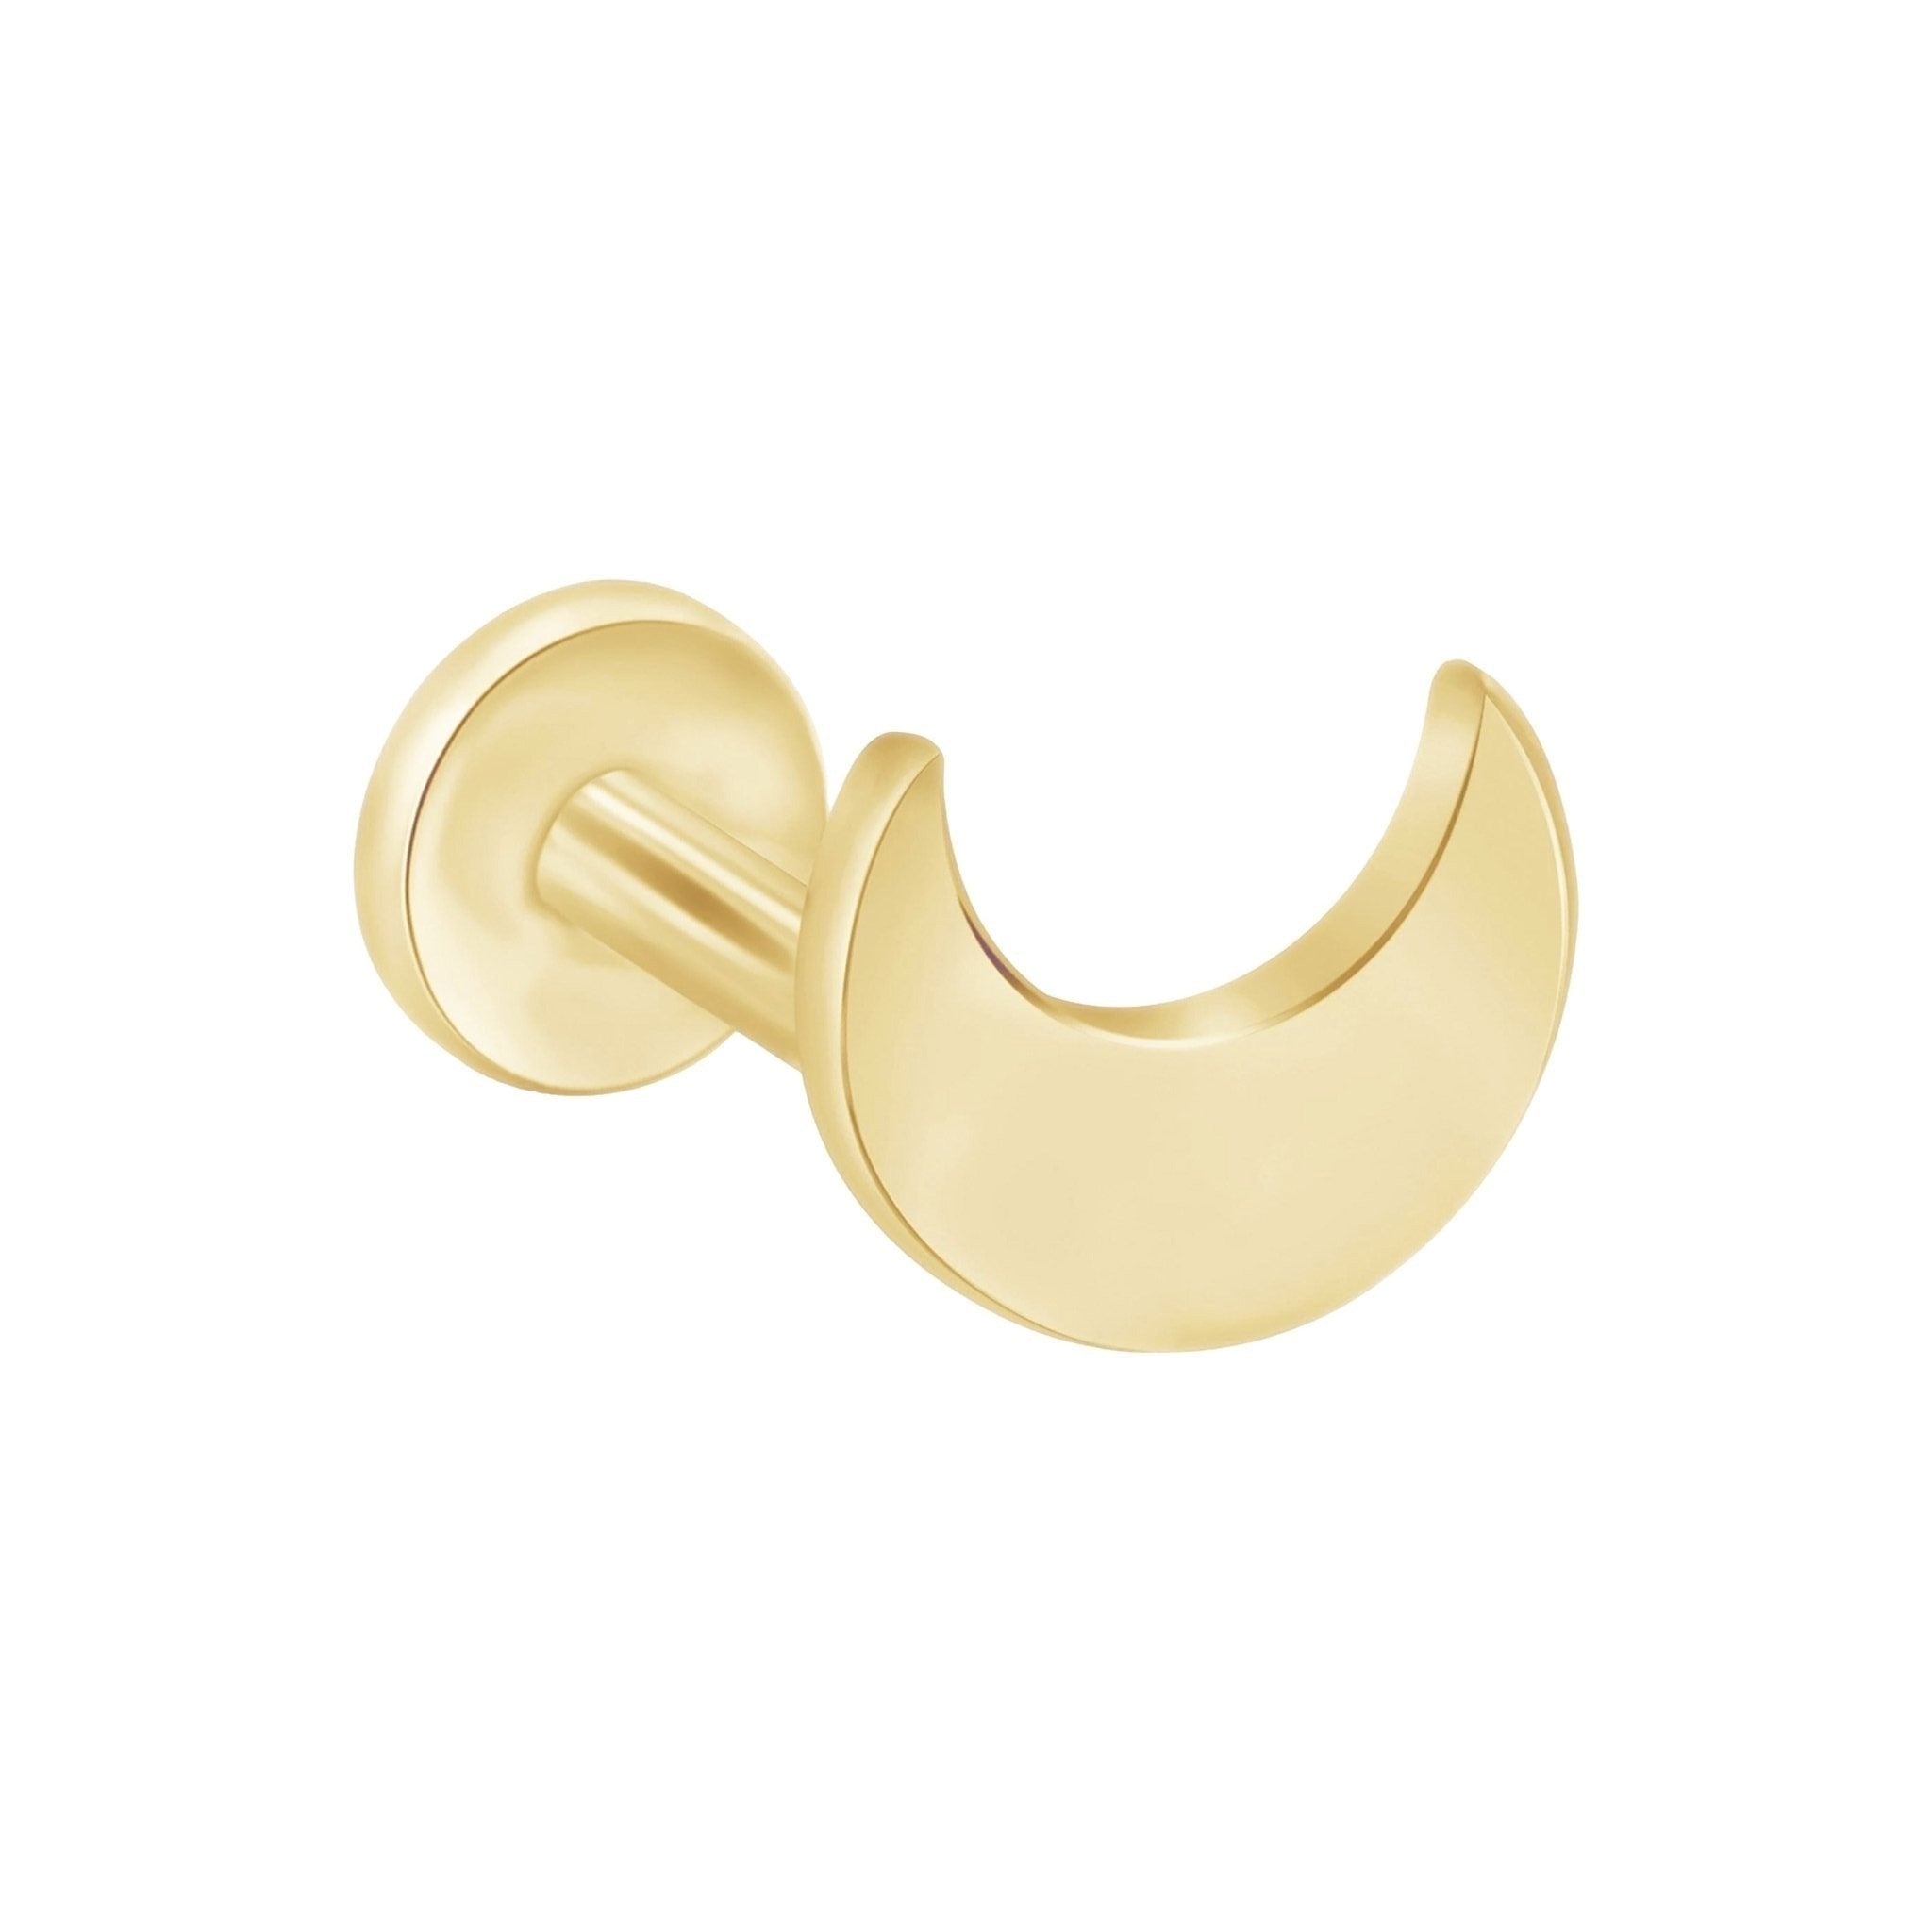 Crescent Moon Flat Back Stud Earring Earrings Estella Collection #product_description# 18102 14k Cartilage Earring Cartilage Earrings #tag4# #tag5# #tag6# #tag7# #tag8# #tag9# #tag10# 5MM